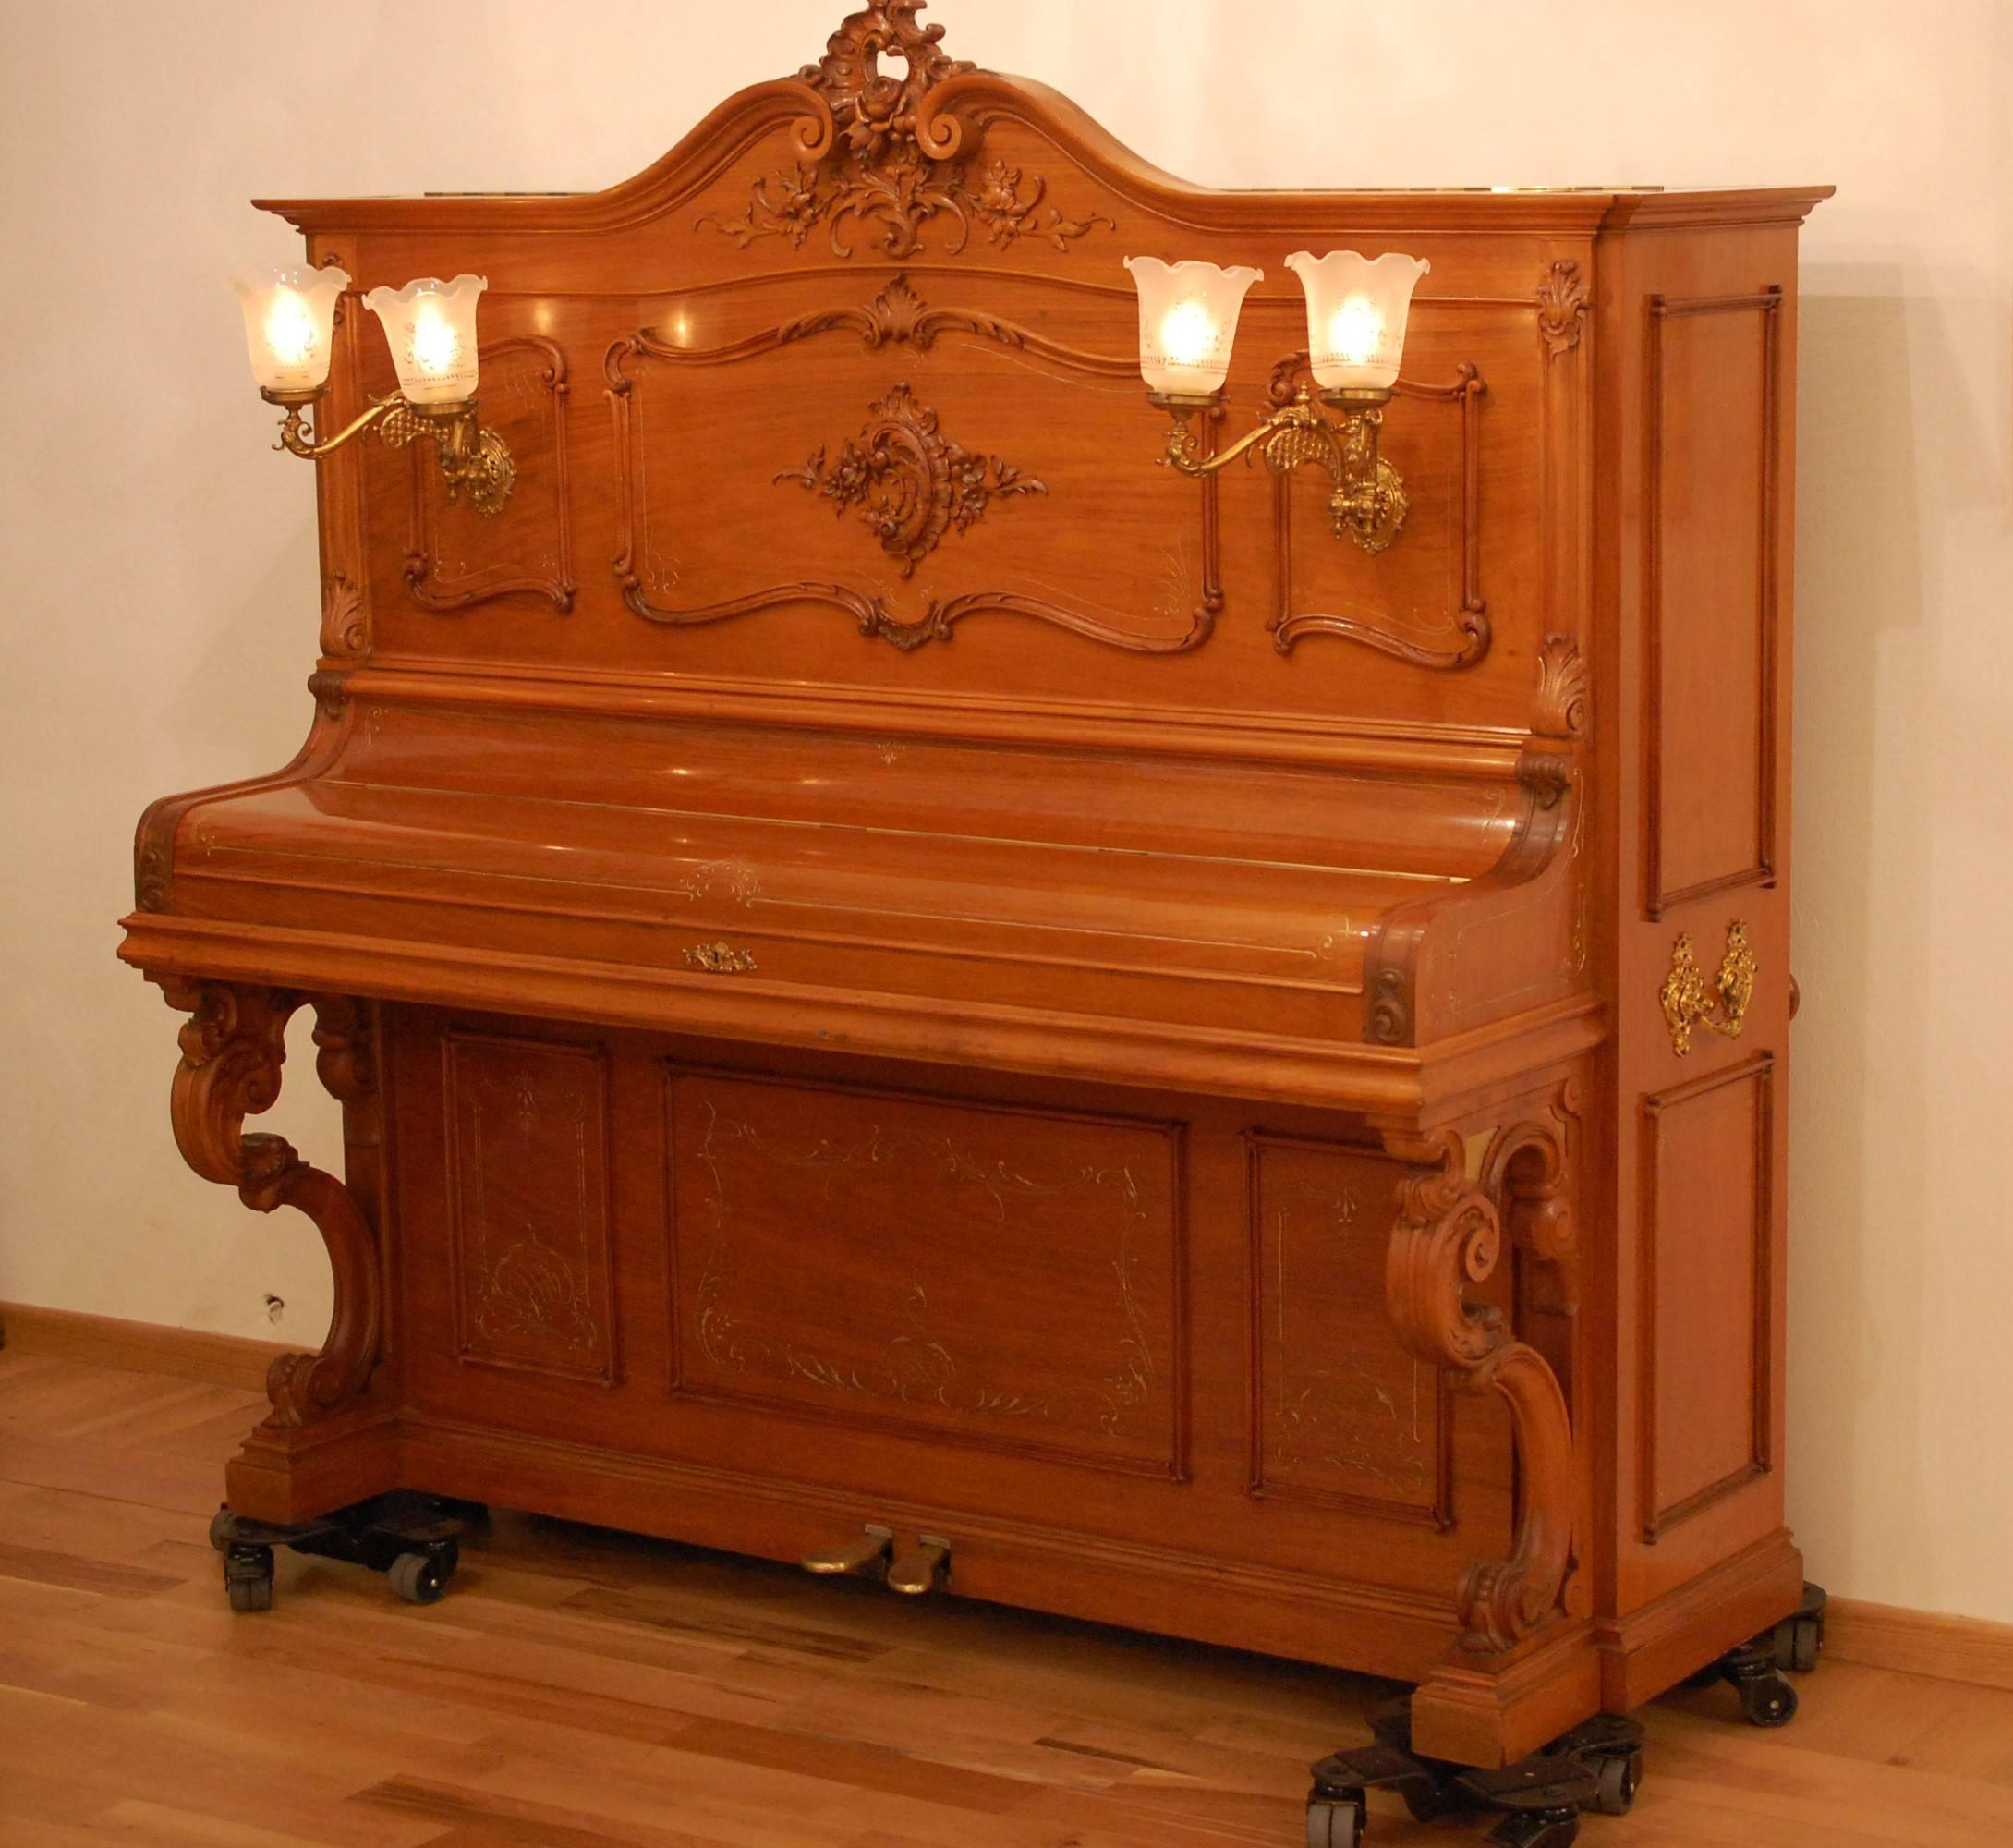 One-of-a-kind upright Art Case piano by Julius Blüthner, Leipzig, Germany. Serial number 57984, year 1901. 88 keys. The sumptuous walnut case is sculpted in a Louis XVI rococo style. Engraved motifs and designs in frame patterns are highlighted in